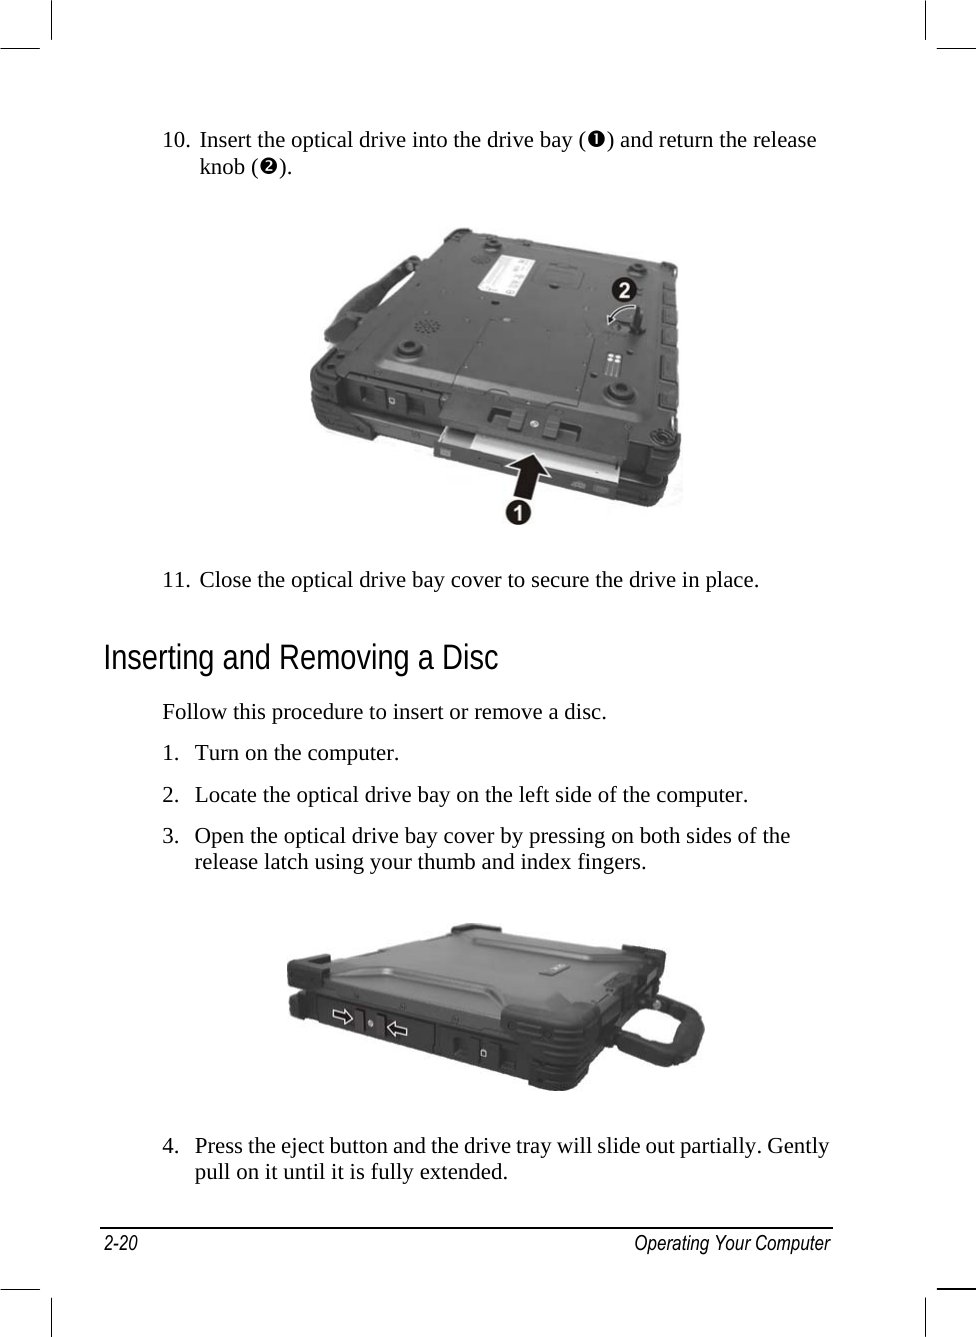  10. Insert the optical drive into the drive bay () and return the release knob ().  11. Close the optical drive bay cover to secure the drive in place. Inserting and Removing a Disc Follow this procedure to insert or remove a disc. 1.  Turn on the computer. 2.  Locate the optical drive bay on the left side of the computer. 3.  Open the optical drive bay cover by pressing on both sides of the release latch using your thumb and index fingers.  4.  Press the eject button and the drive tray will slide out partially. Gently pull on it until it is fully extended. 2-20 Operating Your Computer 